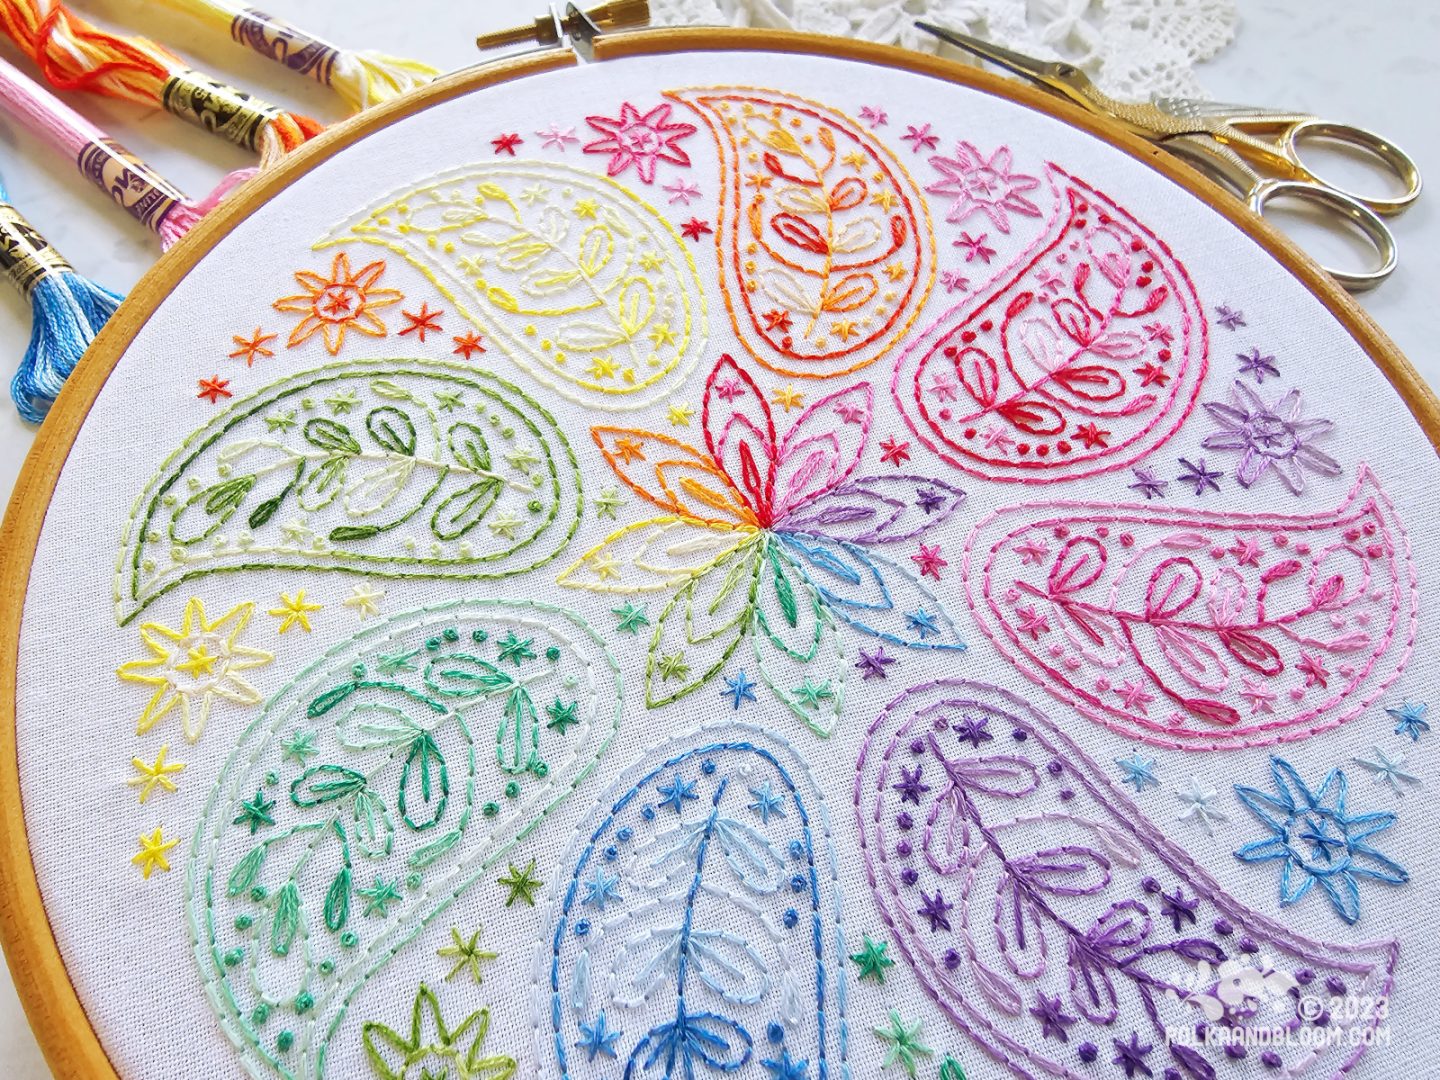 Close up view of an embroidery hoop with white fabric. On the fabric is embroidered a mandala inspired design with eight small paisley shapes each in a different colours in rainbow order.